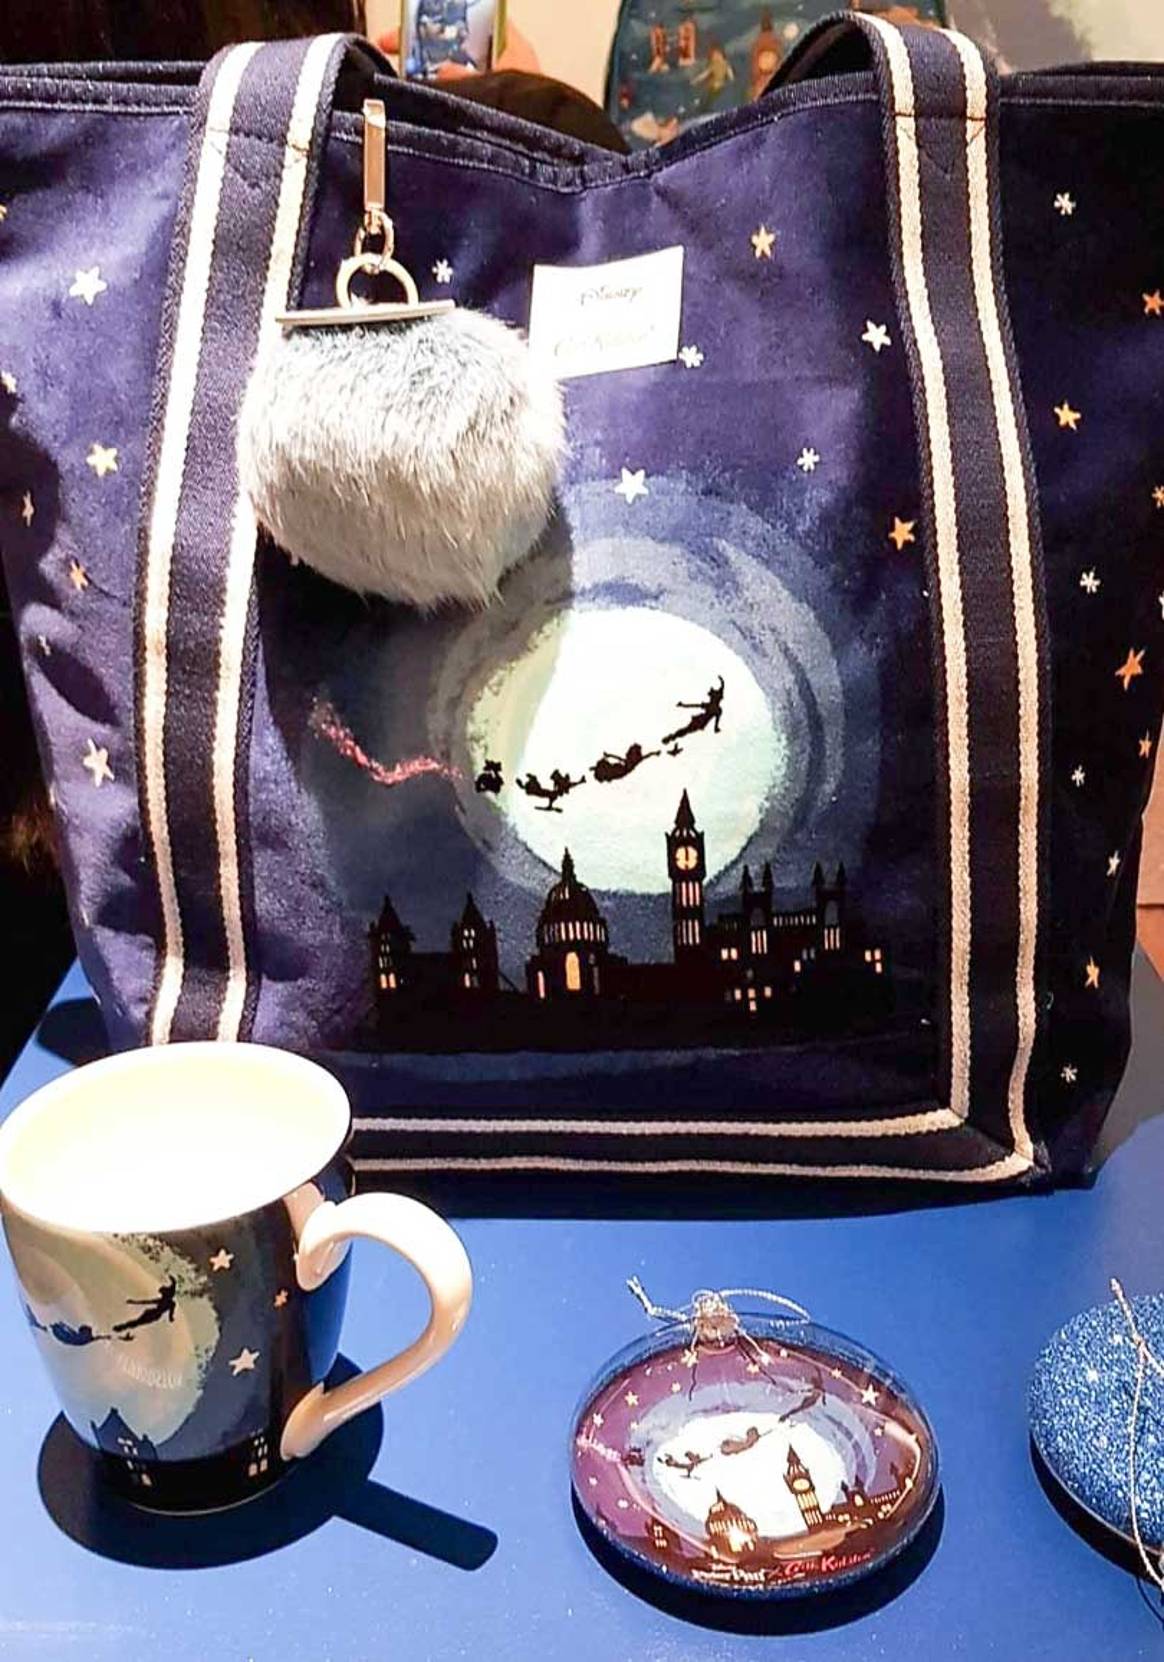 First Look: Disney x Cath Kidston - Peter Pan collection